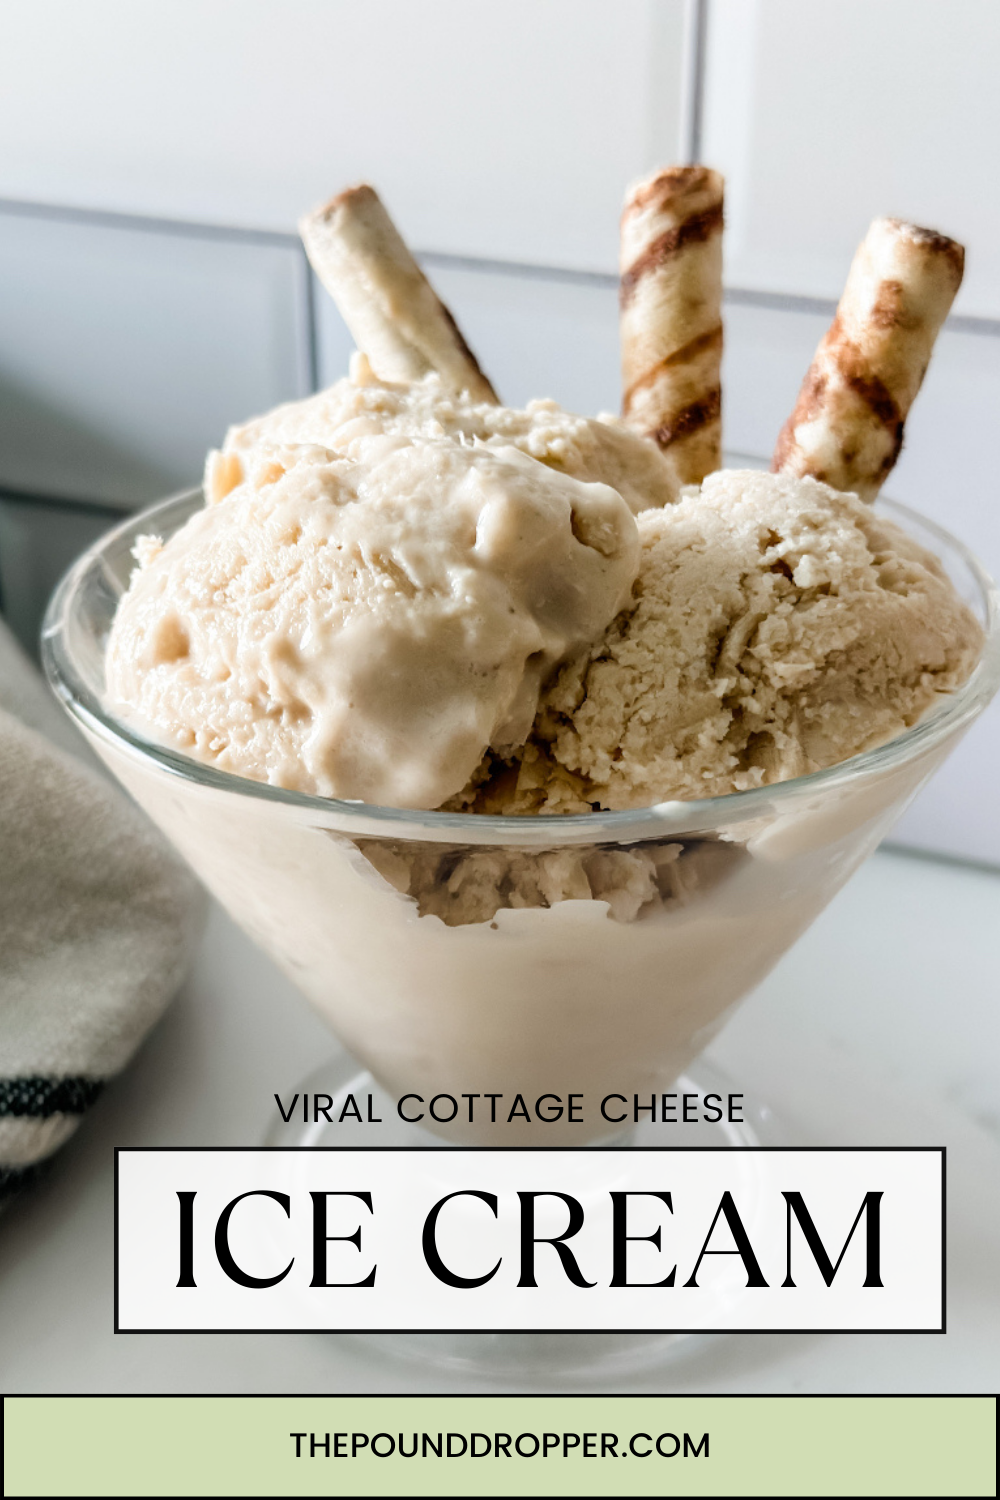 Viral Cottage Cheese Ice Cream  via @pounddropper